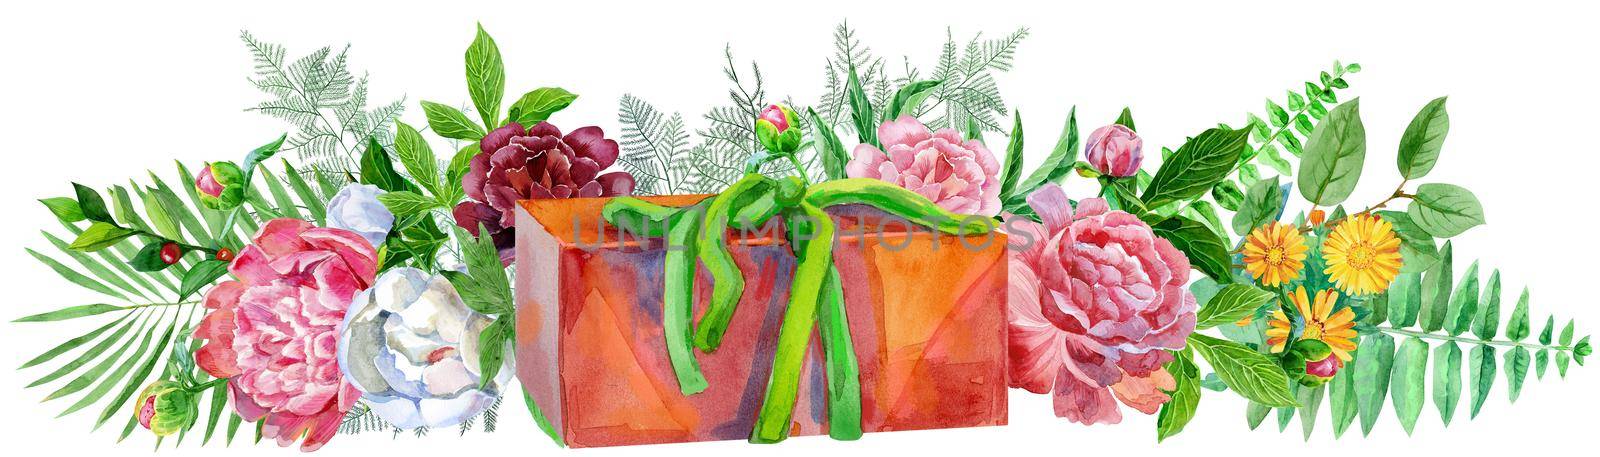 Watercolor llustration with red gift box and peonies. For design, print or background by NataOmsk